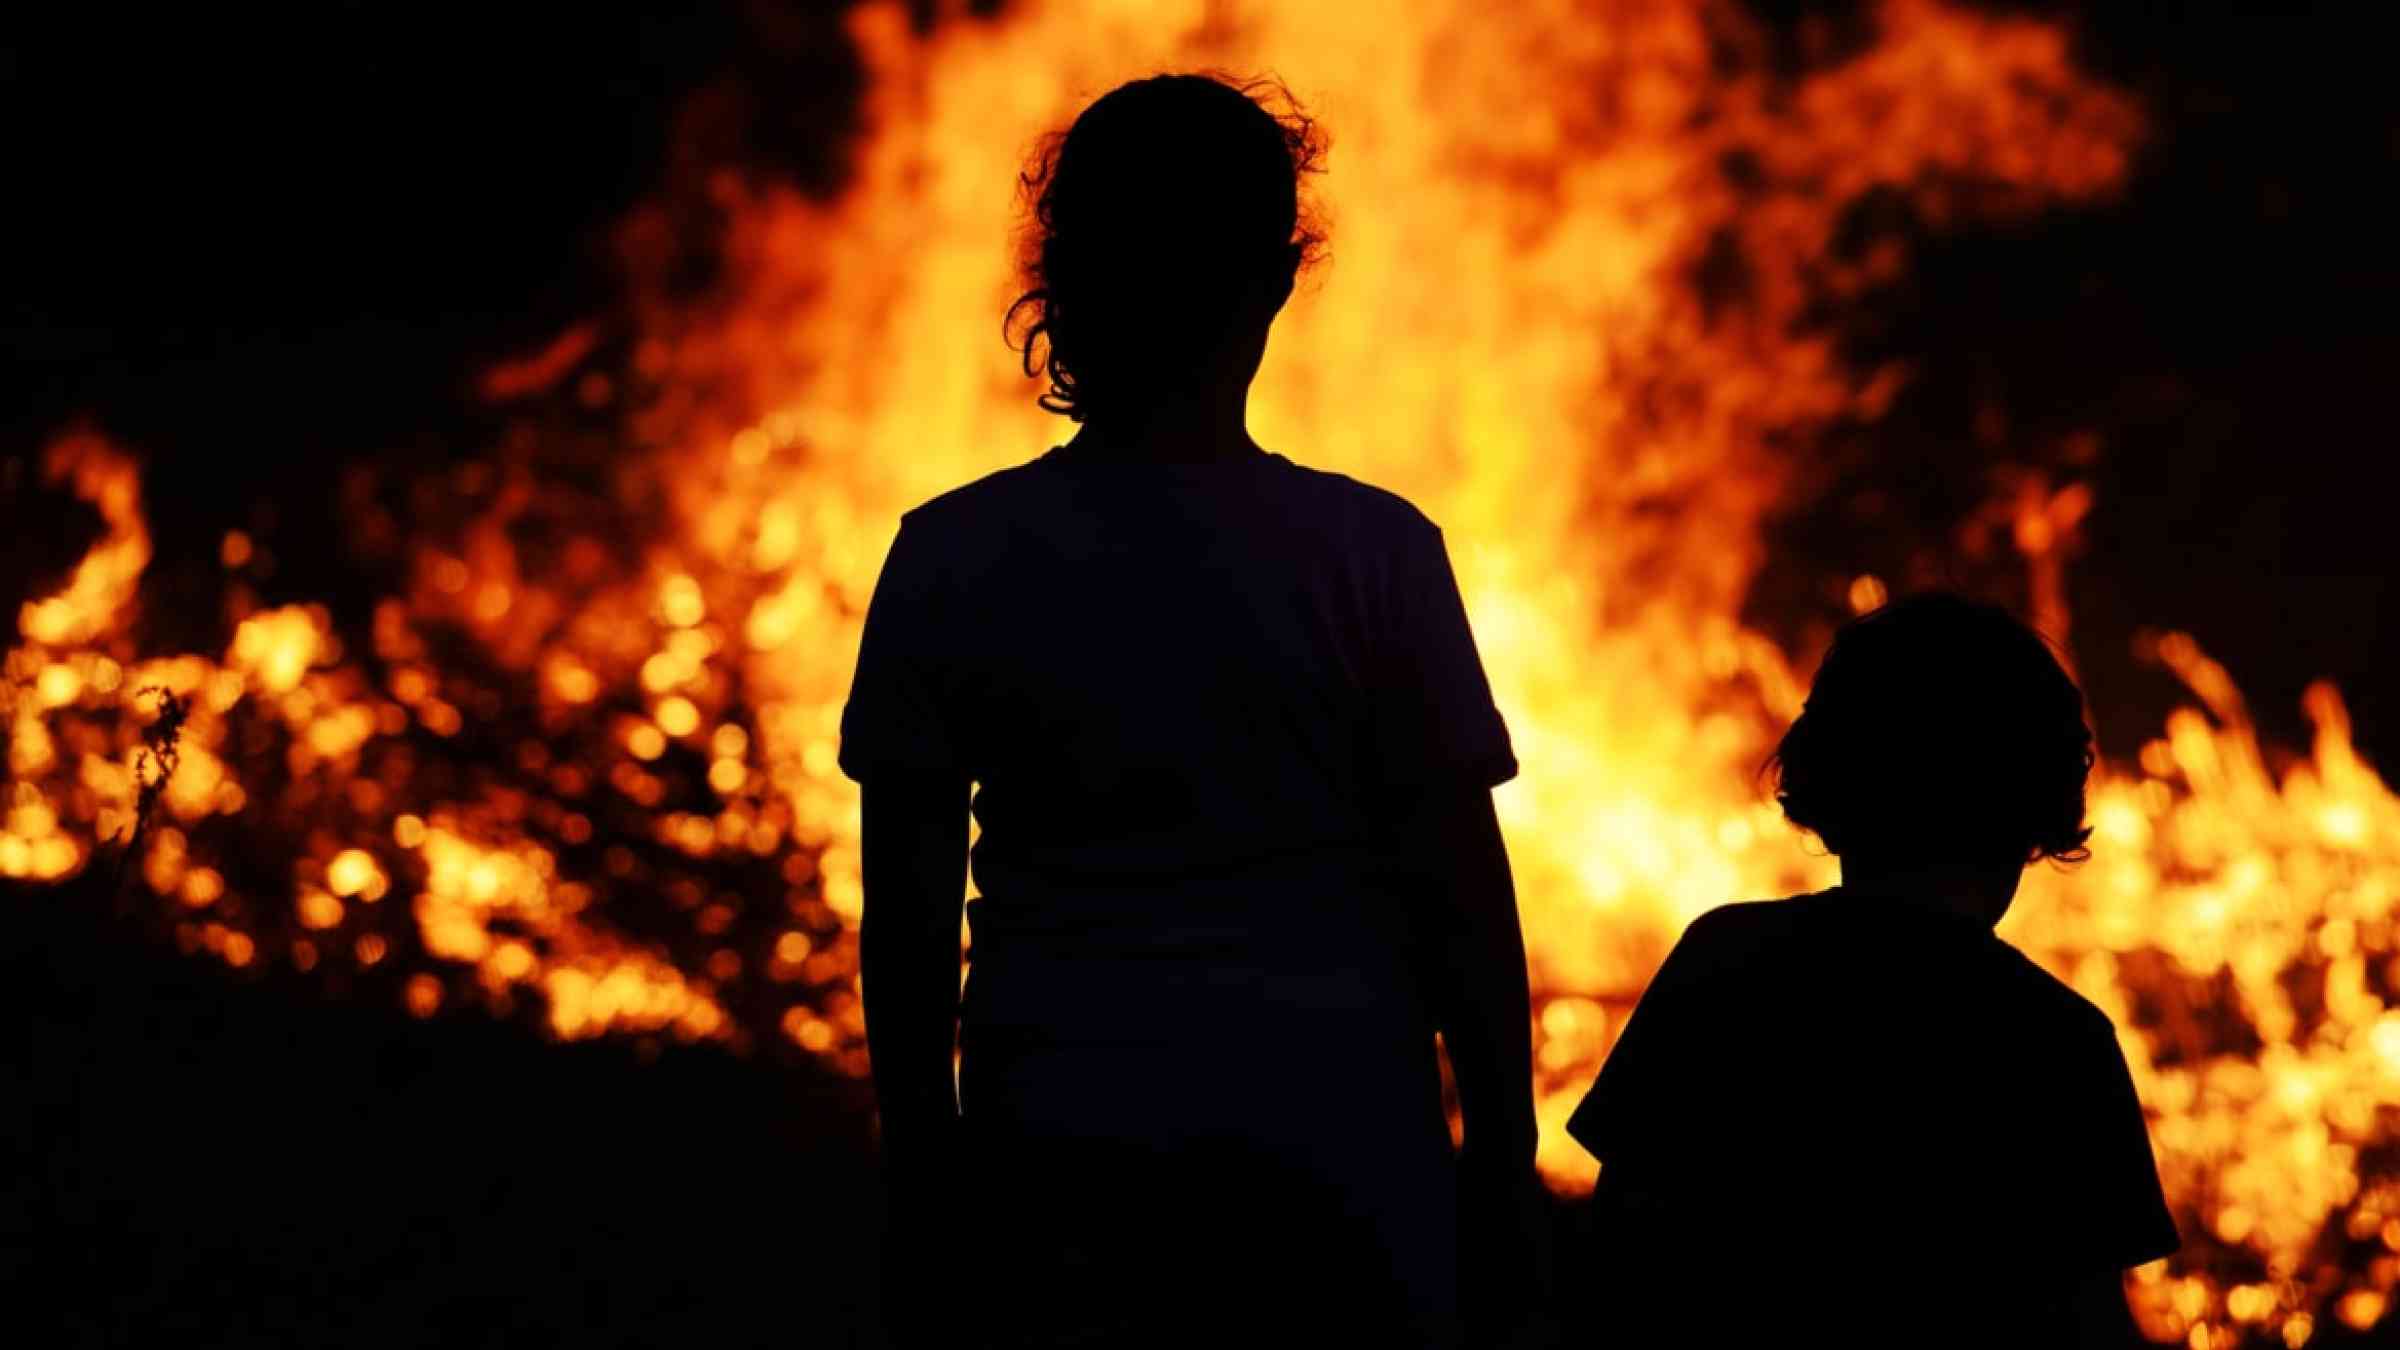 Children's shadow in front of a wildfire